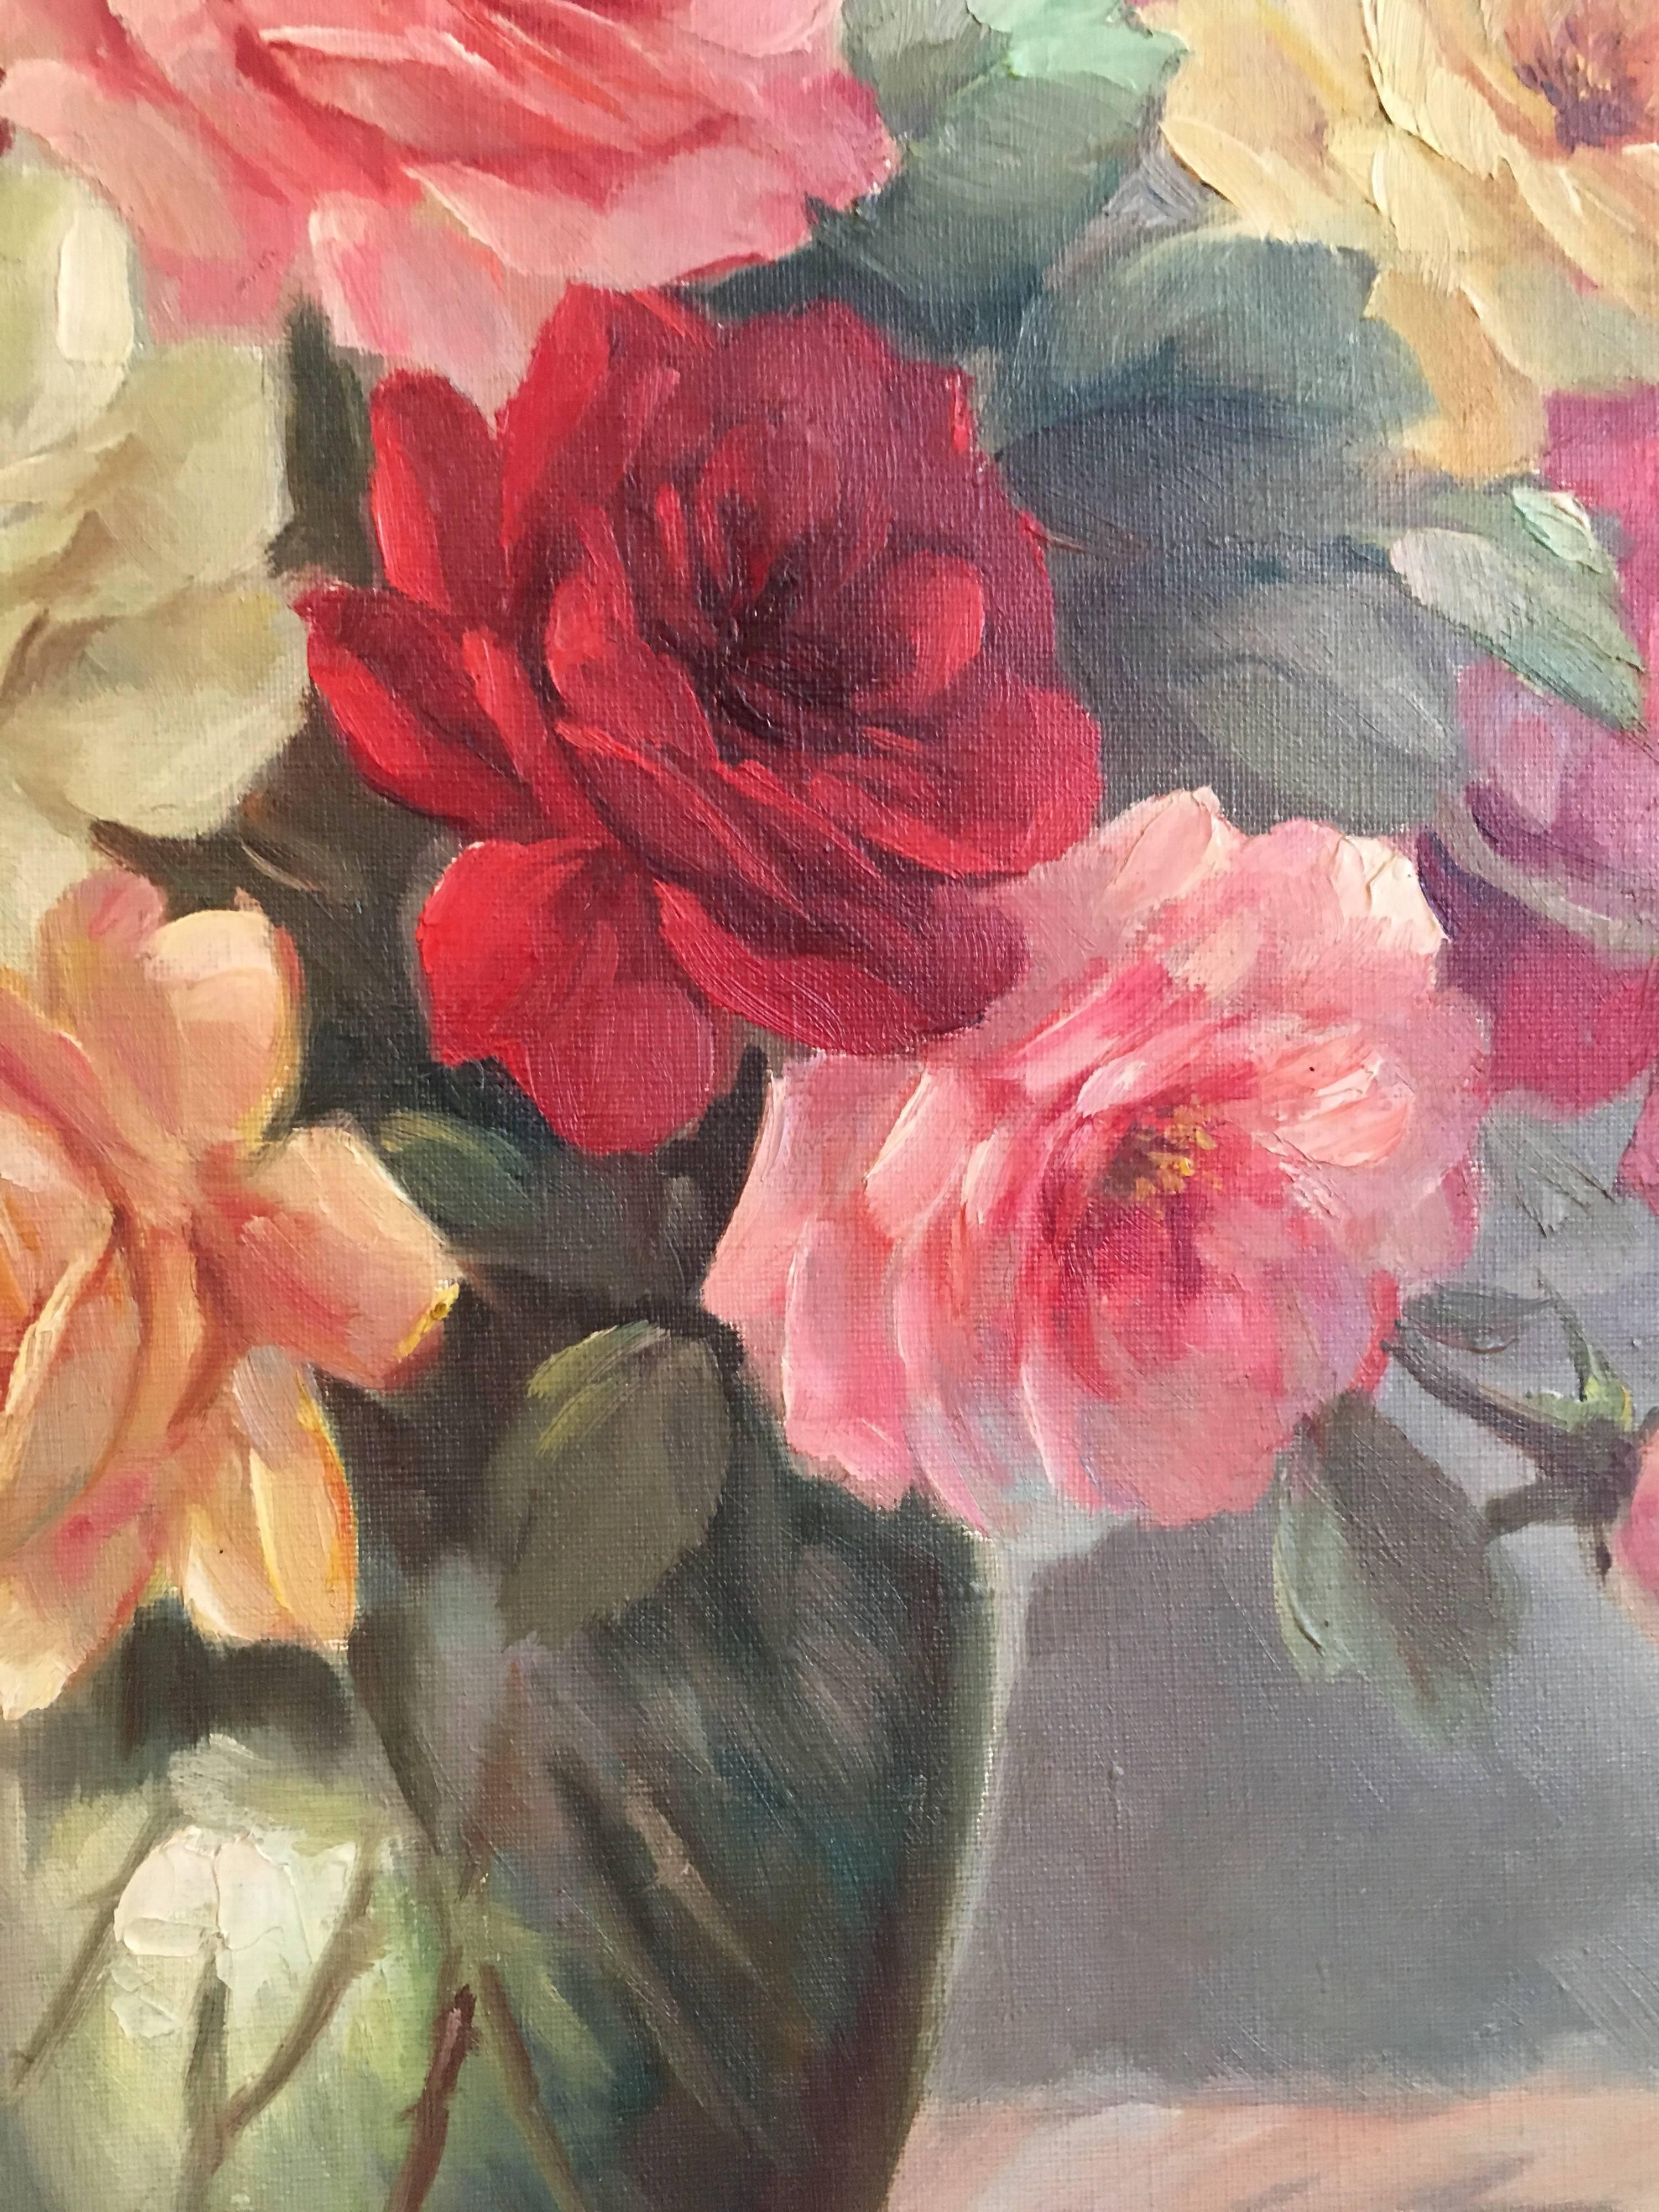 Vintage Roses, mid 20th century
French School, signed
Oil painting on canvas, framed
Framed size: 26 x 46.5 inches

Stunning still life oil painting of a brimming bouquet of roses. The full, colourful head of a rose makes these delightful flowers a